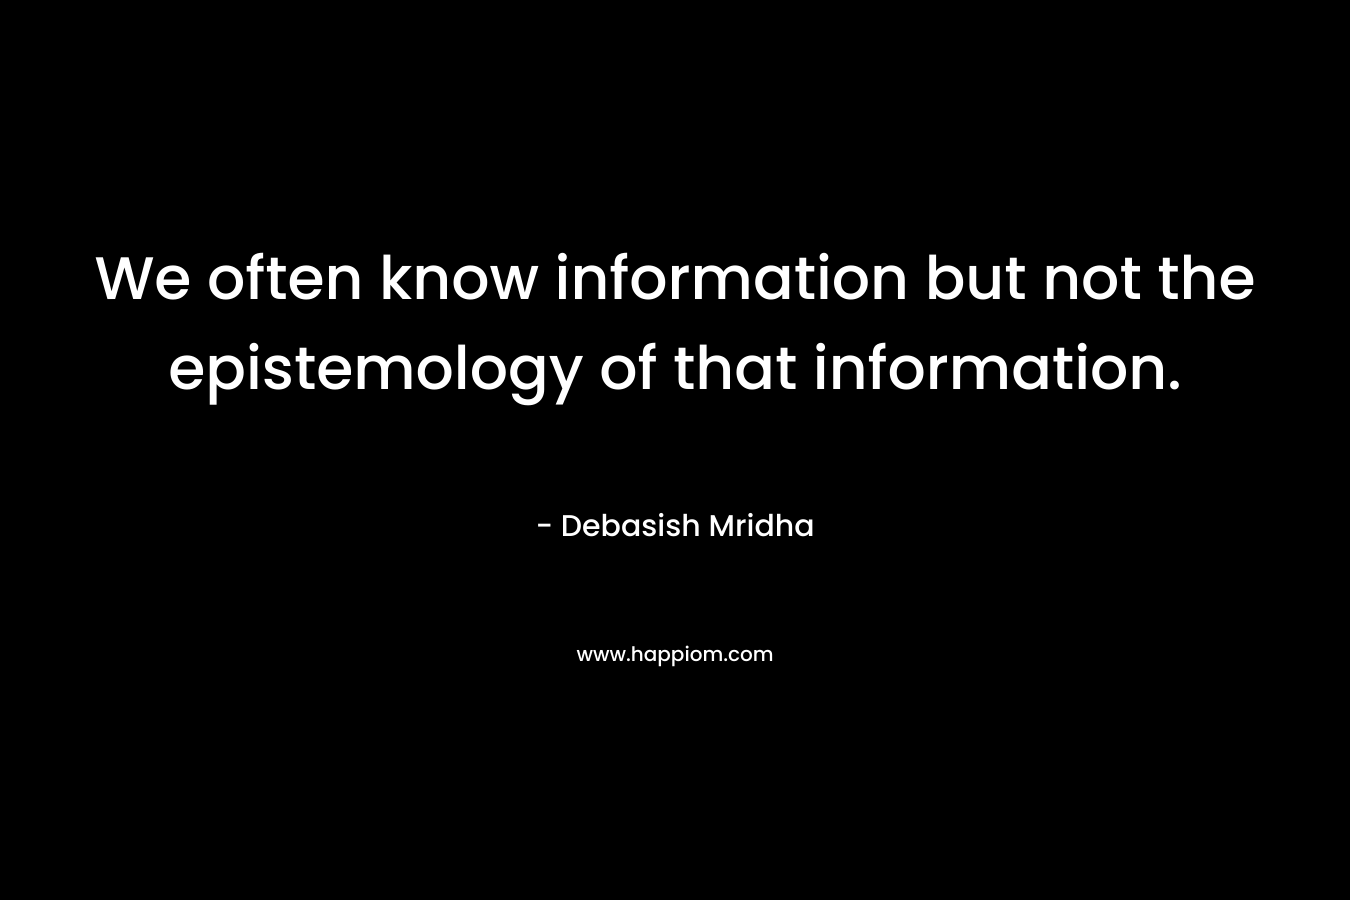 We often know information but not the epistemology of that information.